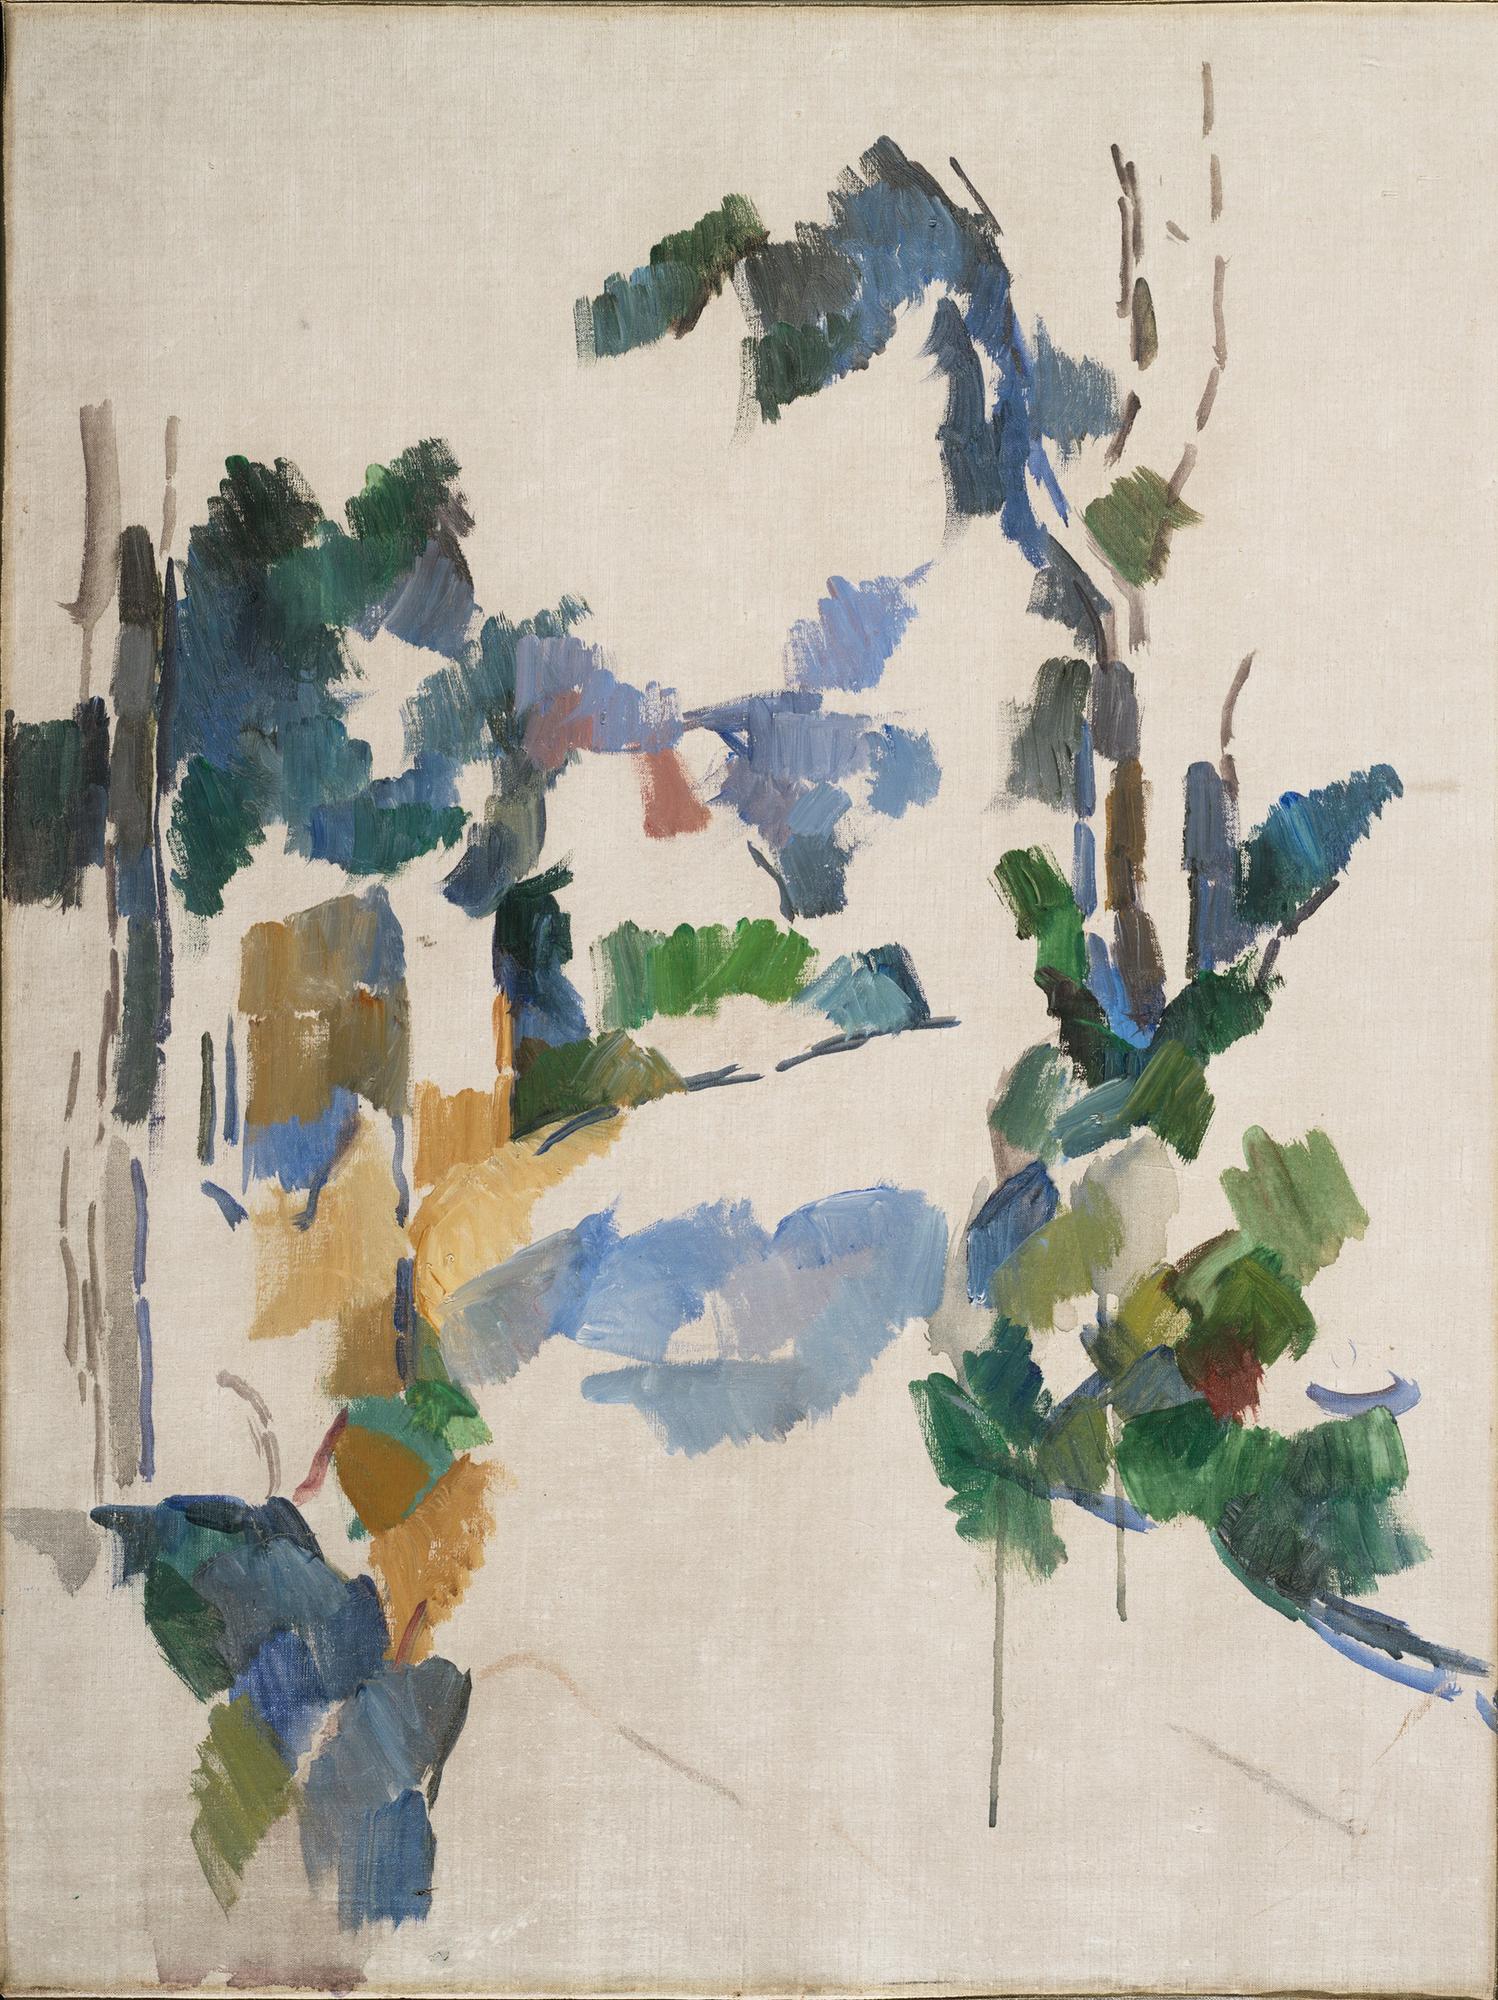 Paul Cezanne, unfinished painting of trees